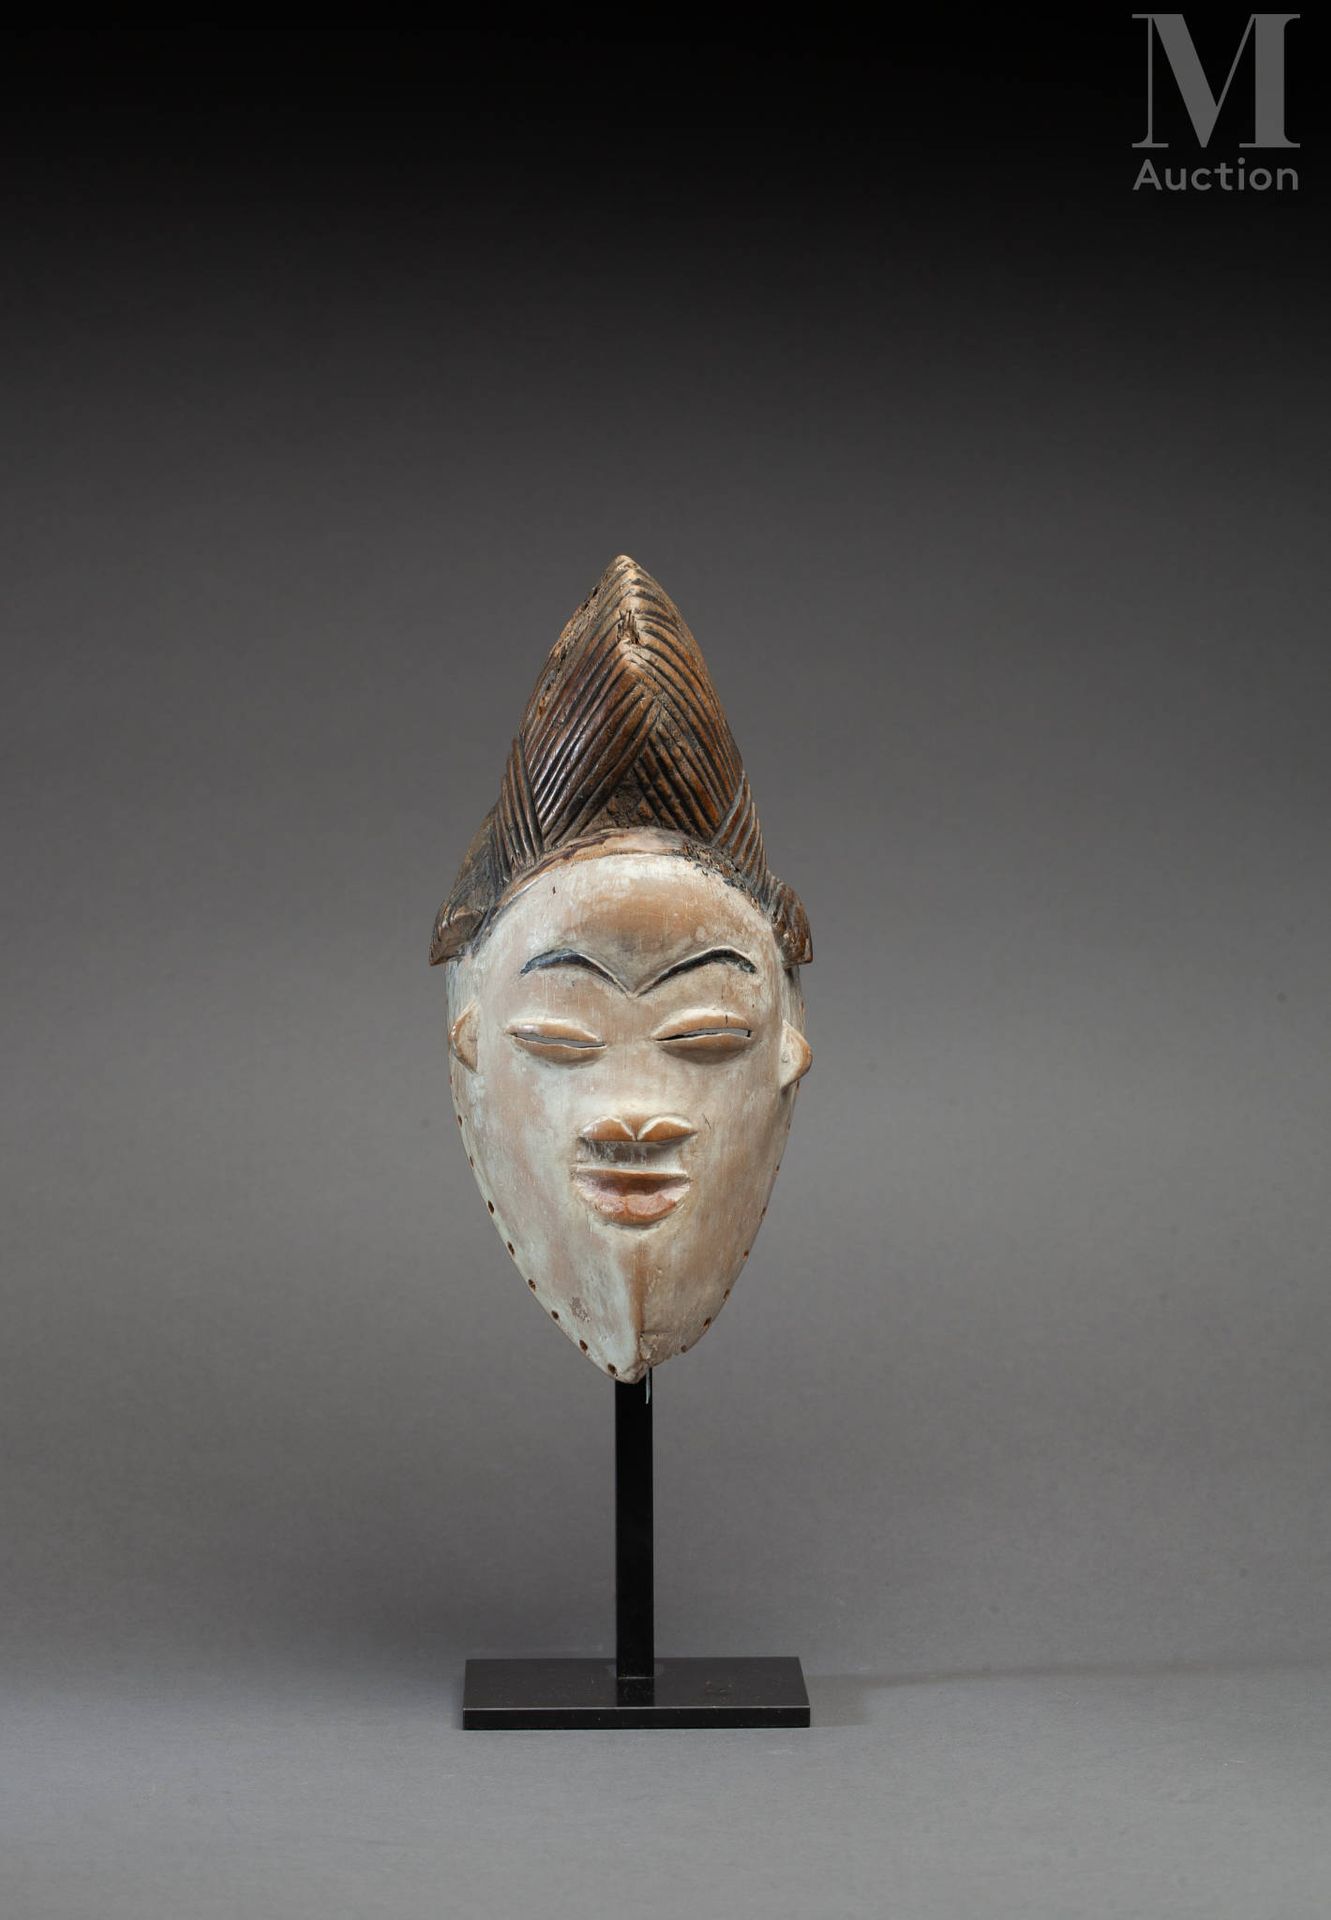 Masque Punu (Gabon) Masquette with an expressive face, half-closed eyes with thr&hellip;